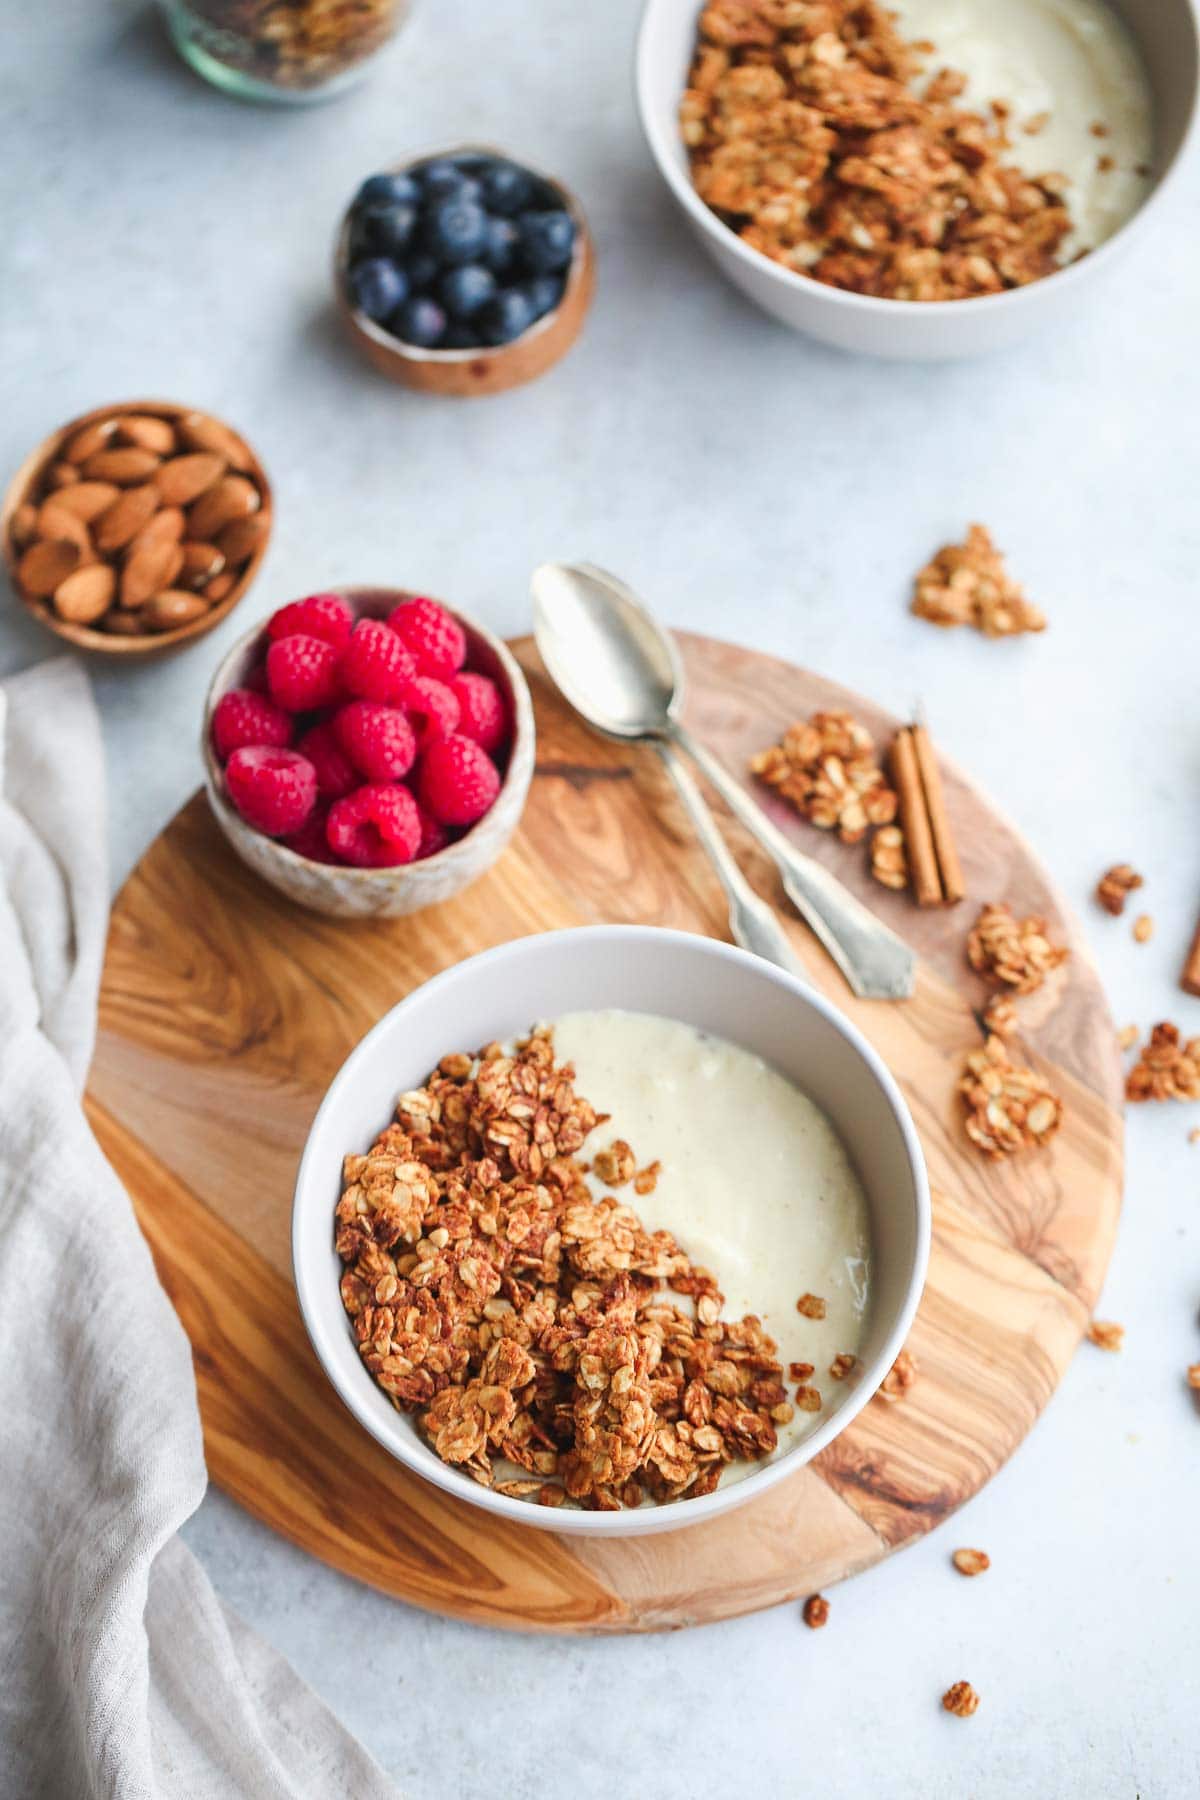 Granola and yogurt in a bowl on a wooden board, with small bowls around it filled with fruit and nuts